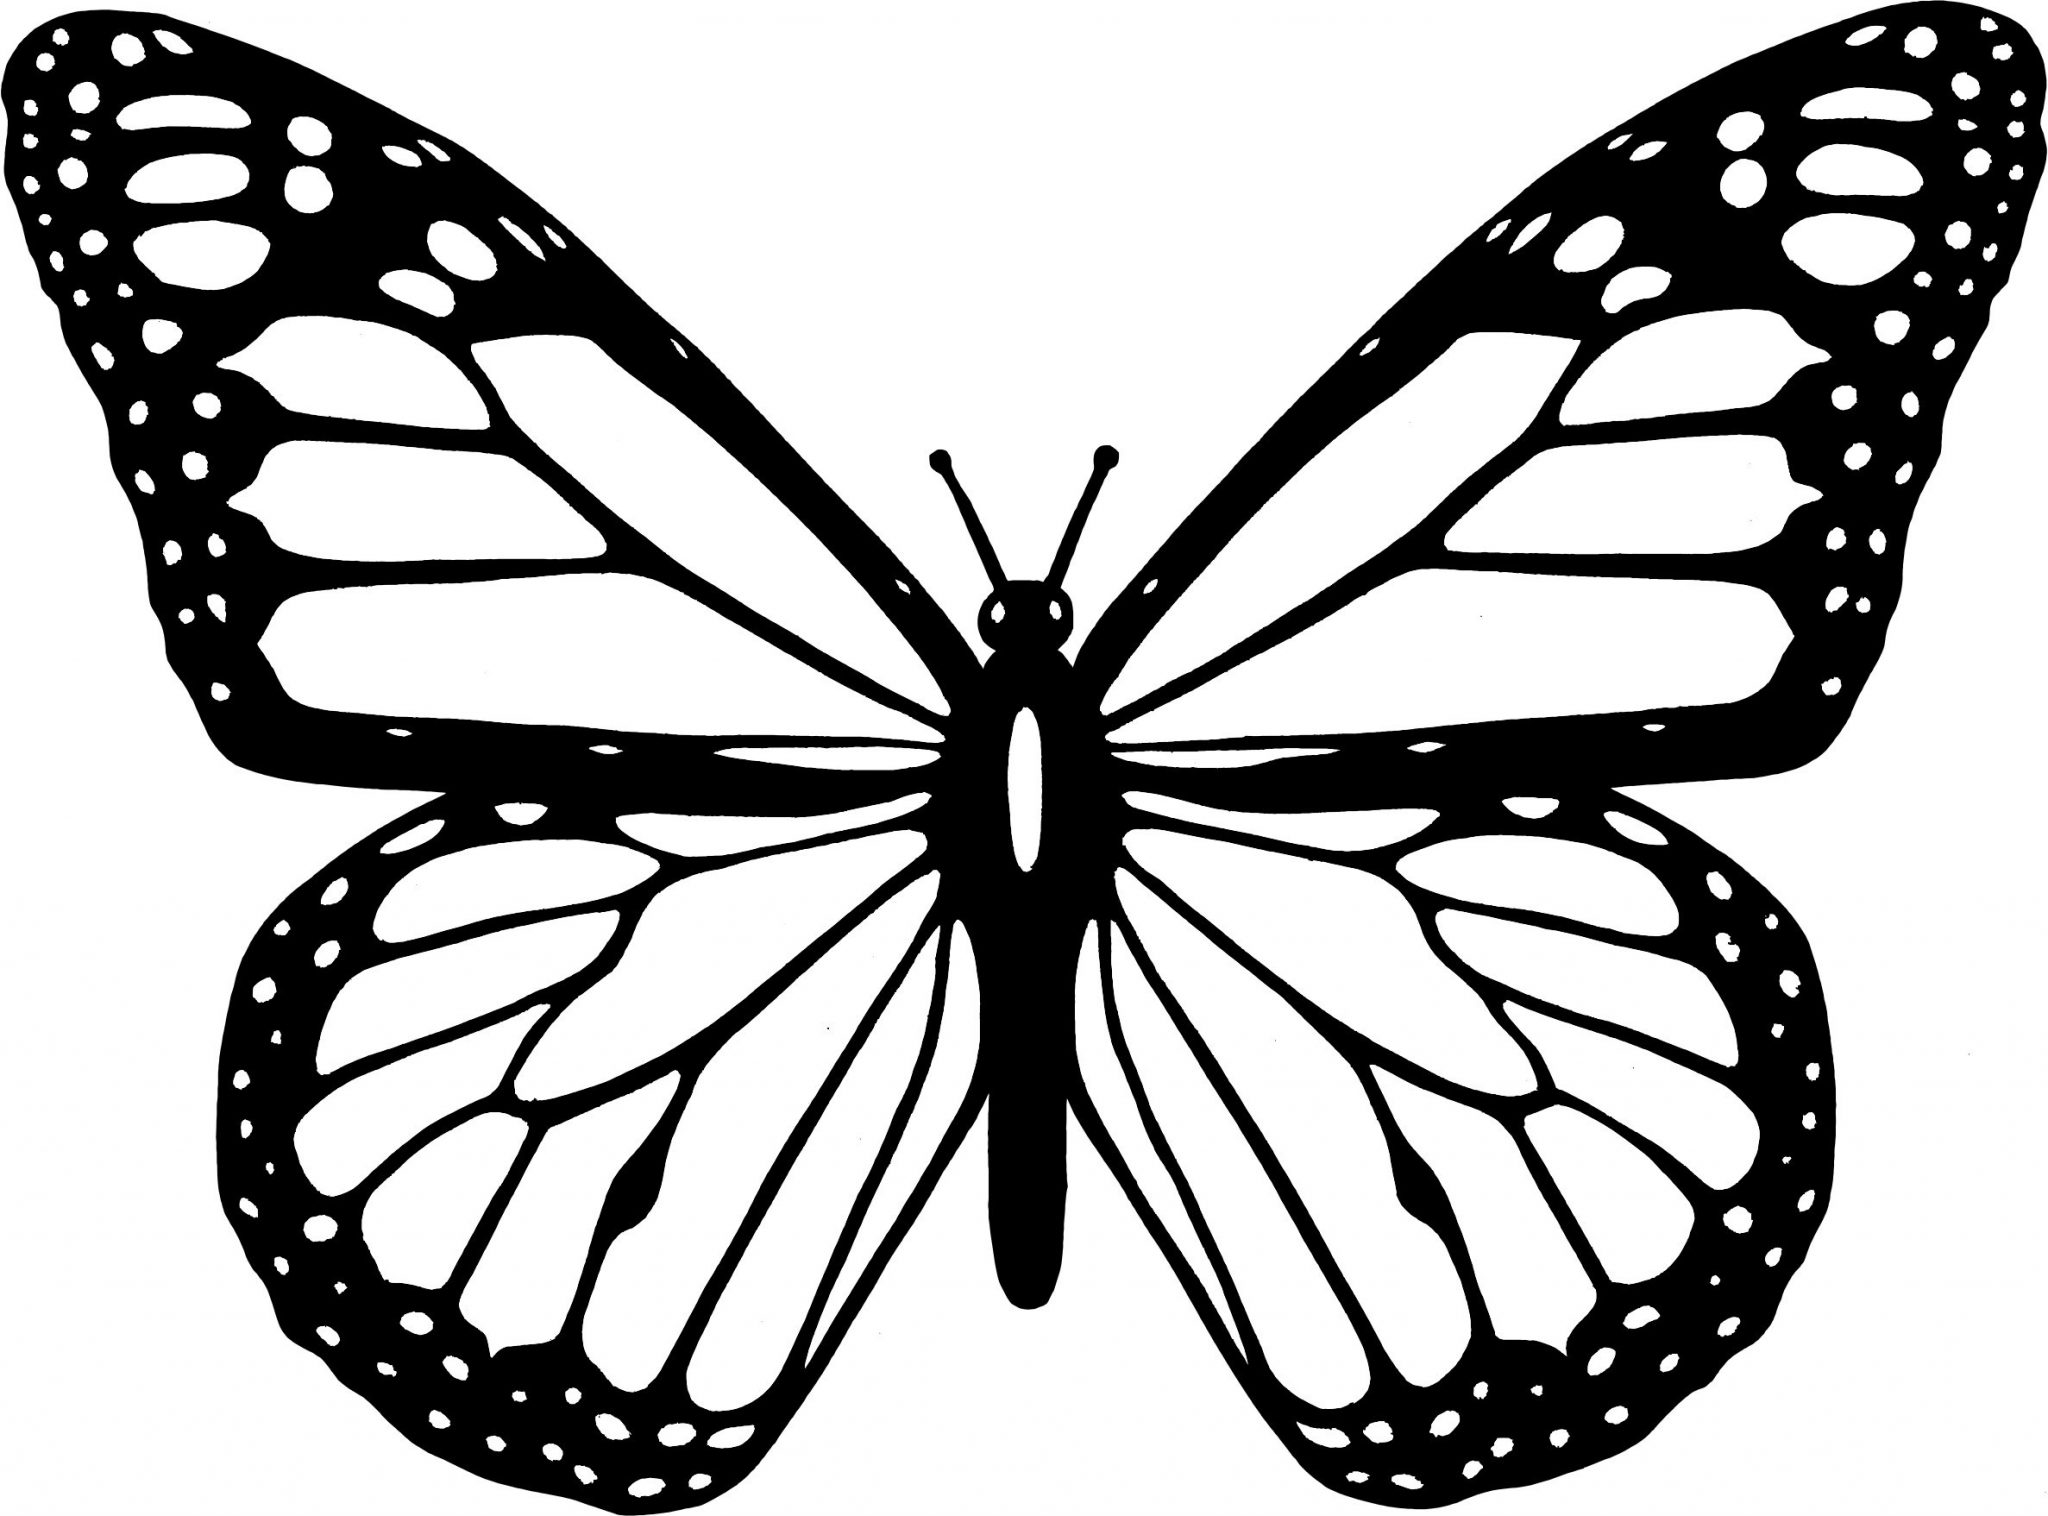 Monarch butterfly Coloring Page | BubaKids.com